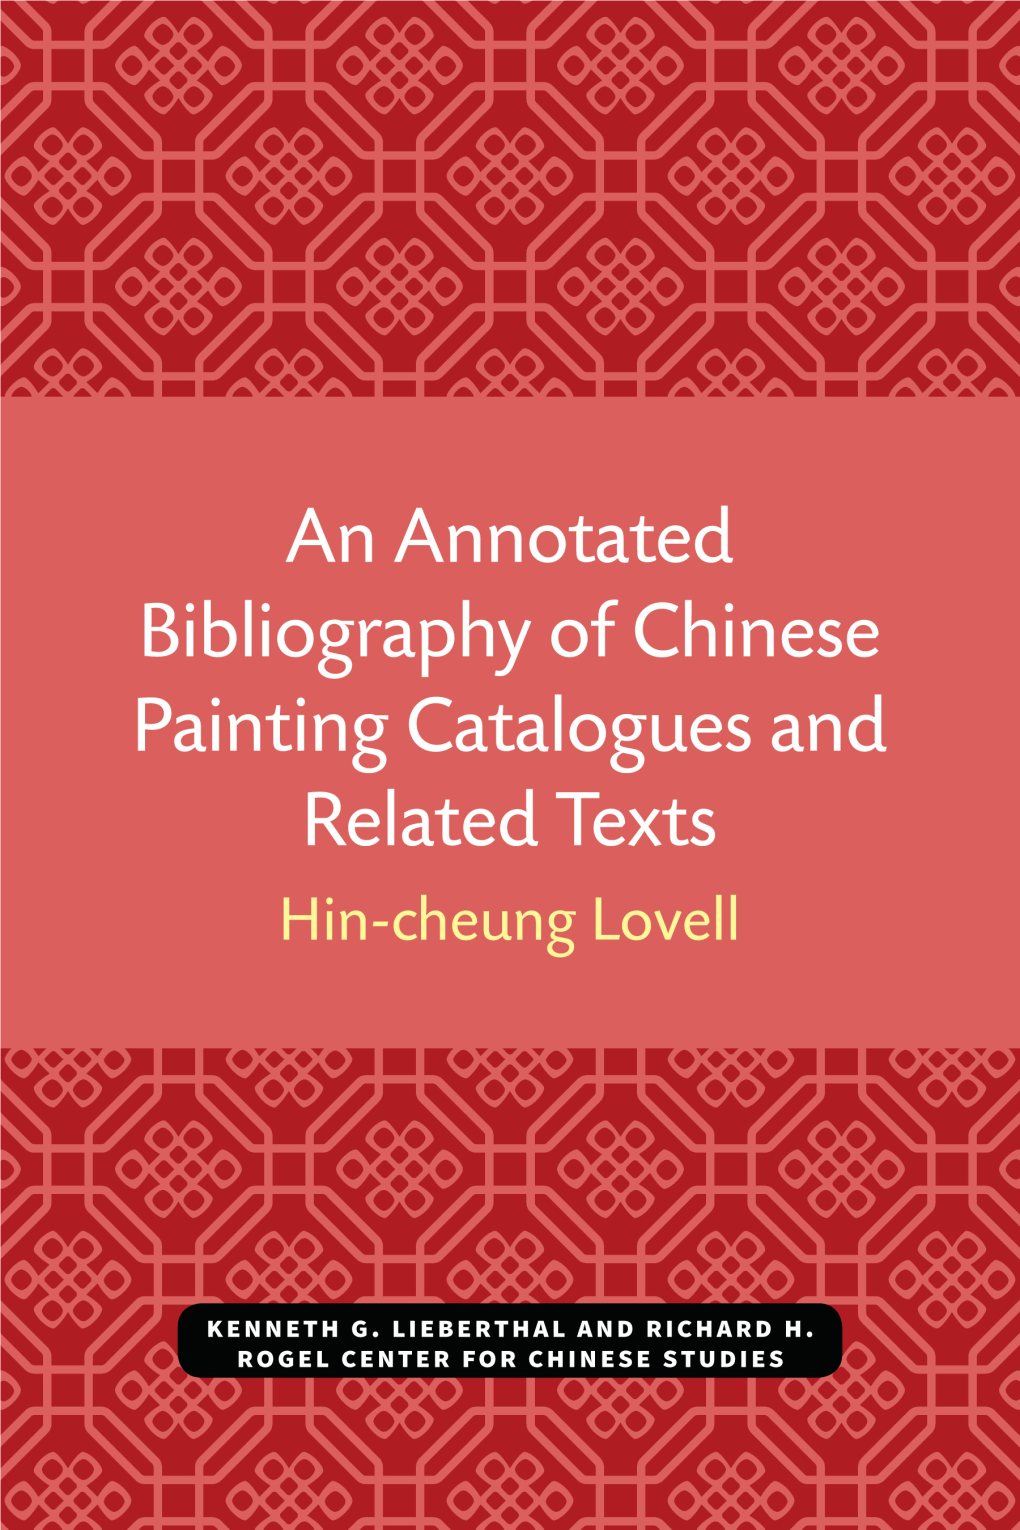 An Annotated Bibliography of Chinese Painting Catalogues and Related Texts, by Hin-Cheung Lovell